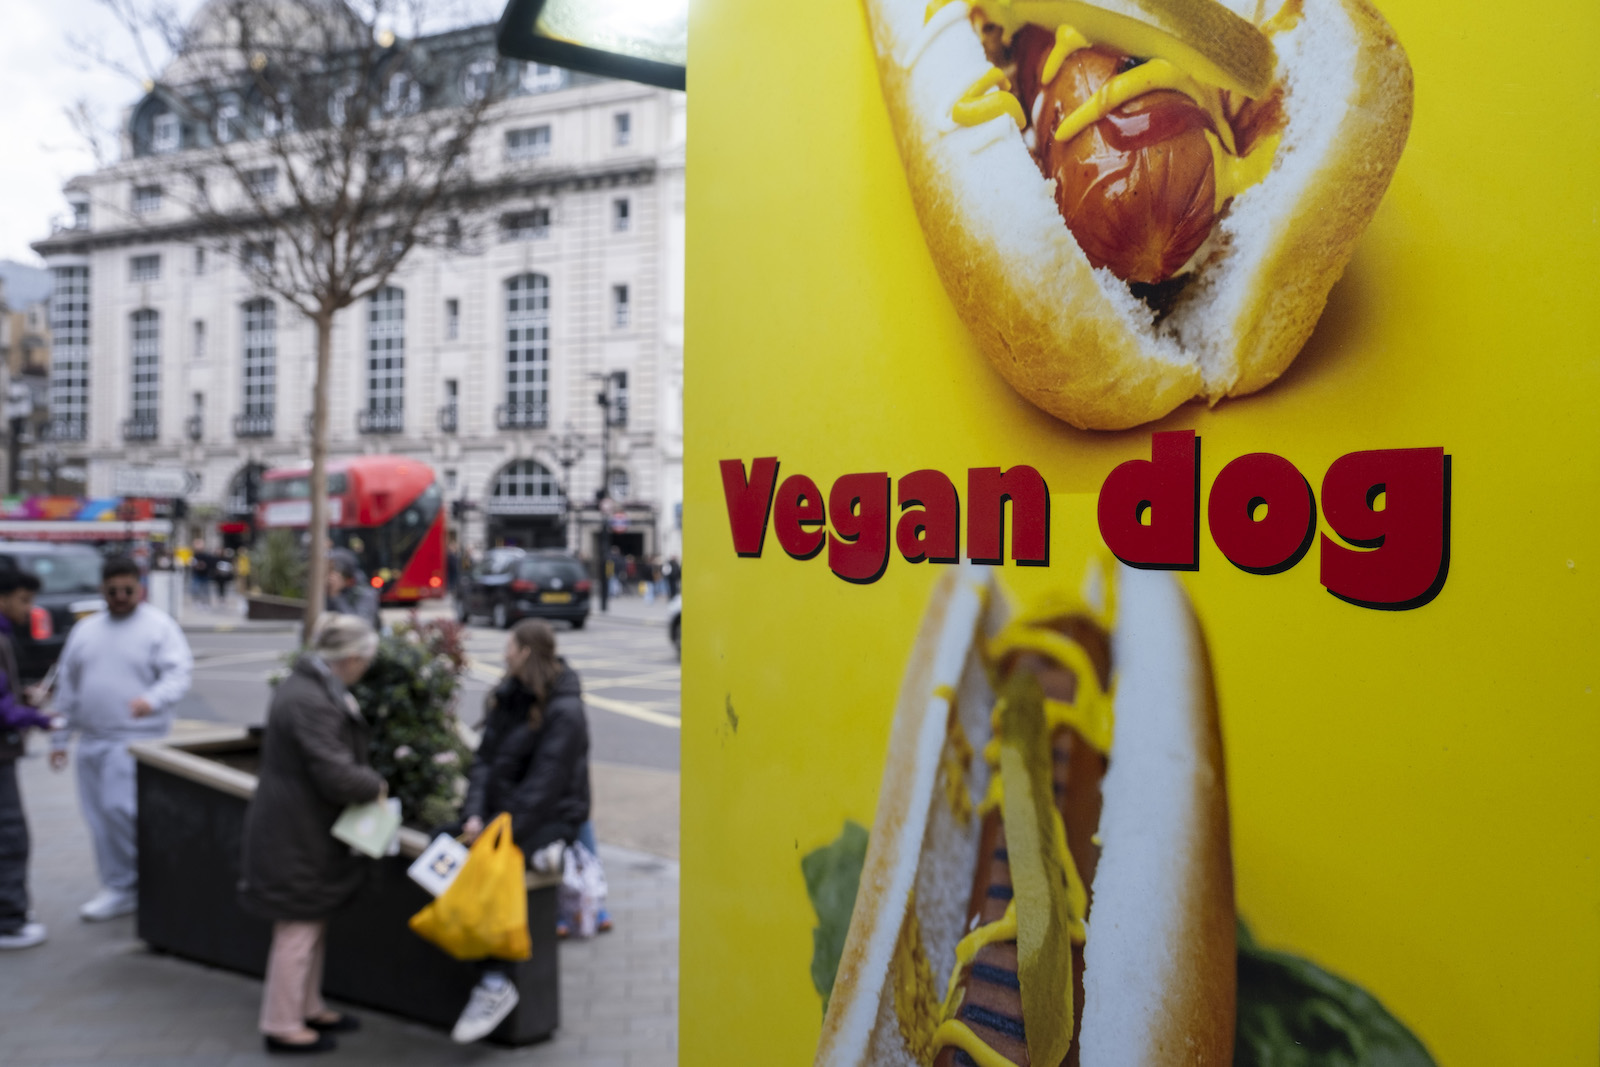 A yellow sign featuring the words 'Vegan dog' and photographs of hot dogs in the foreground of a gray urban scene